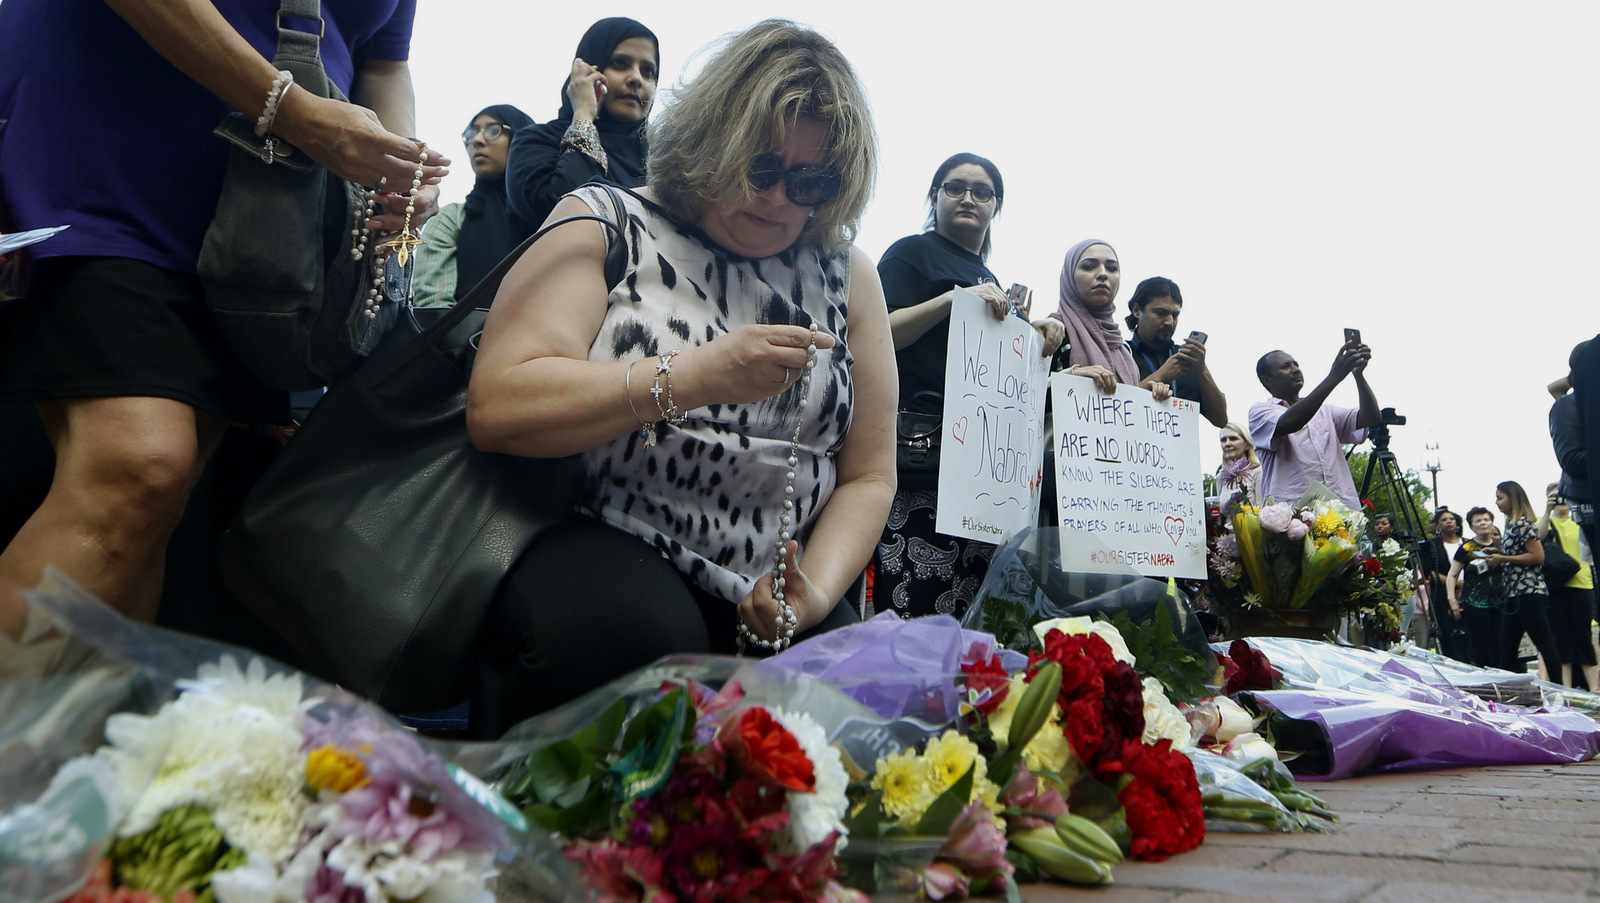 Supporters of Nabra Hassanen, who was killed over the weekend, kneel and pray with a rosary prior to the start of a vigil in honor of Nabar on, June 21, 2017, in Reston, Va. About 5,000 mourners attended Wednesday's funeral of Nabre, a Muslim girl whose beating death, blamed by police on a motorist's road rage, has some people in her community fearing for their safety. (AP/Steve Helber)